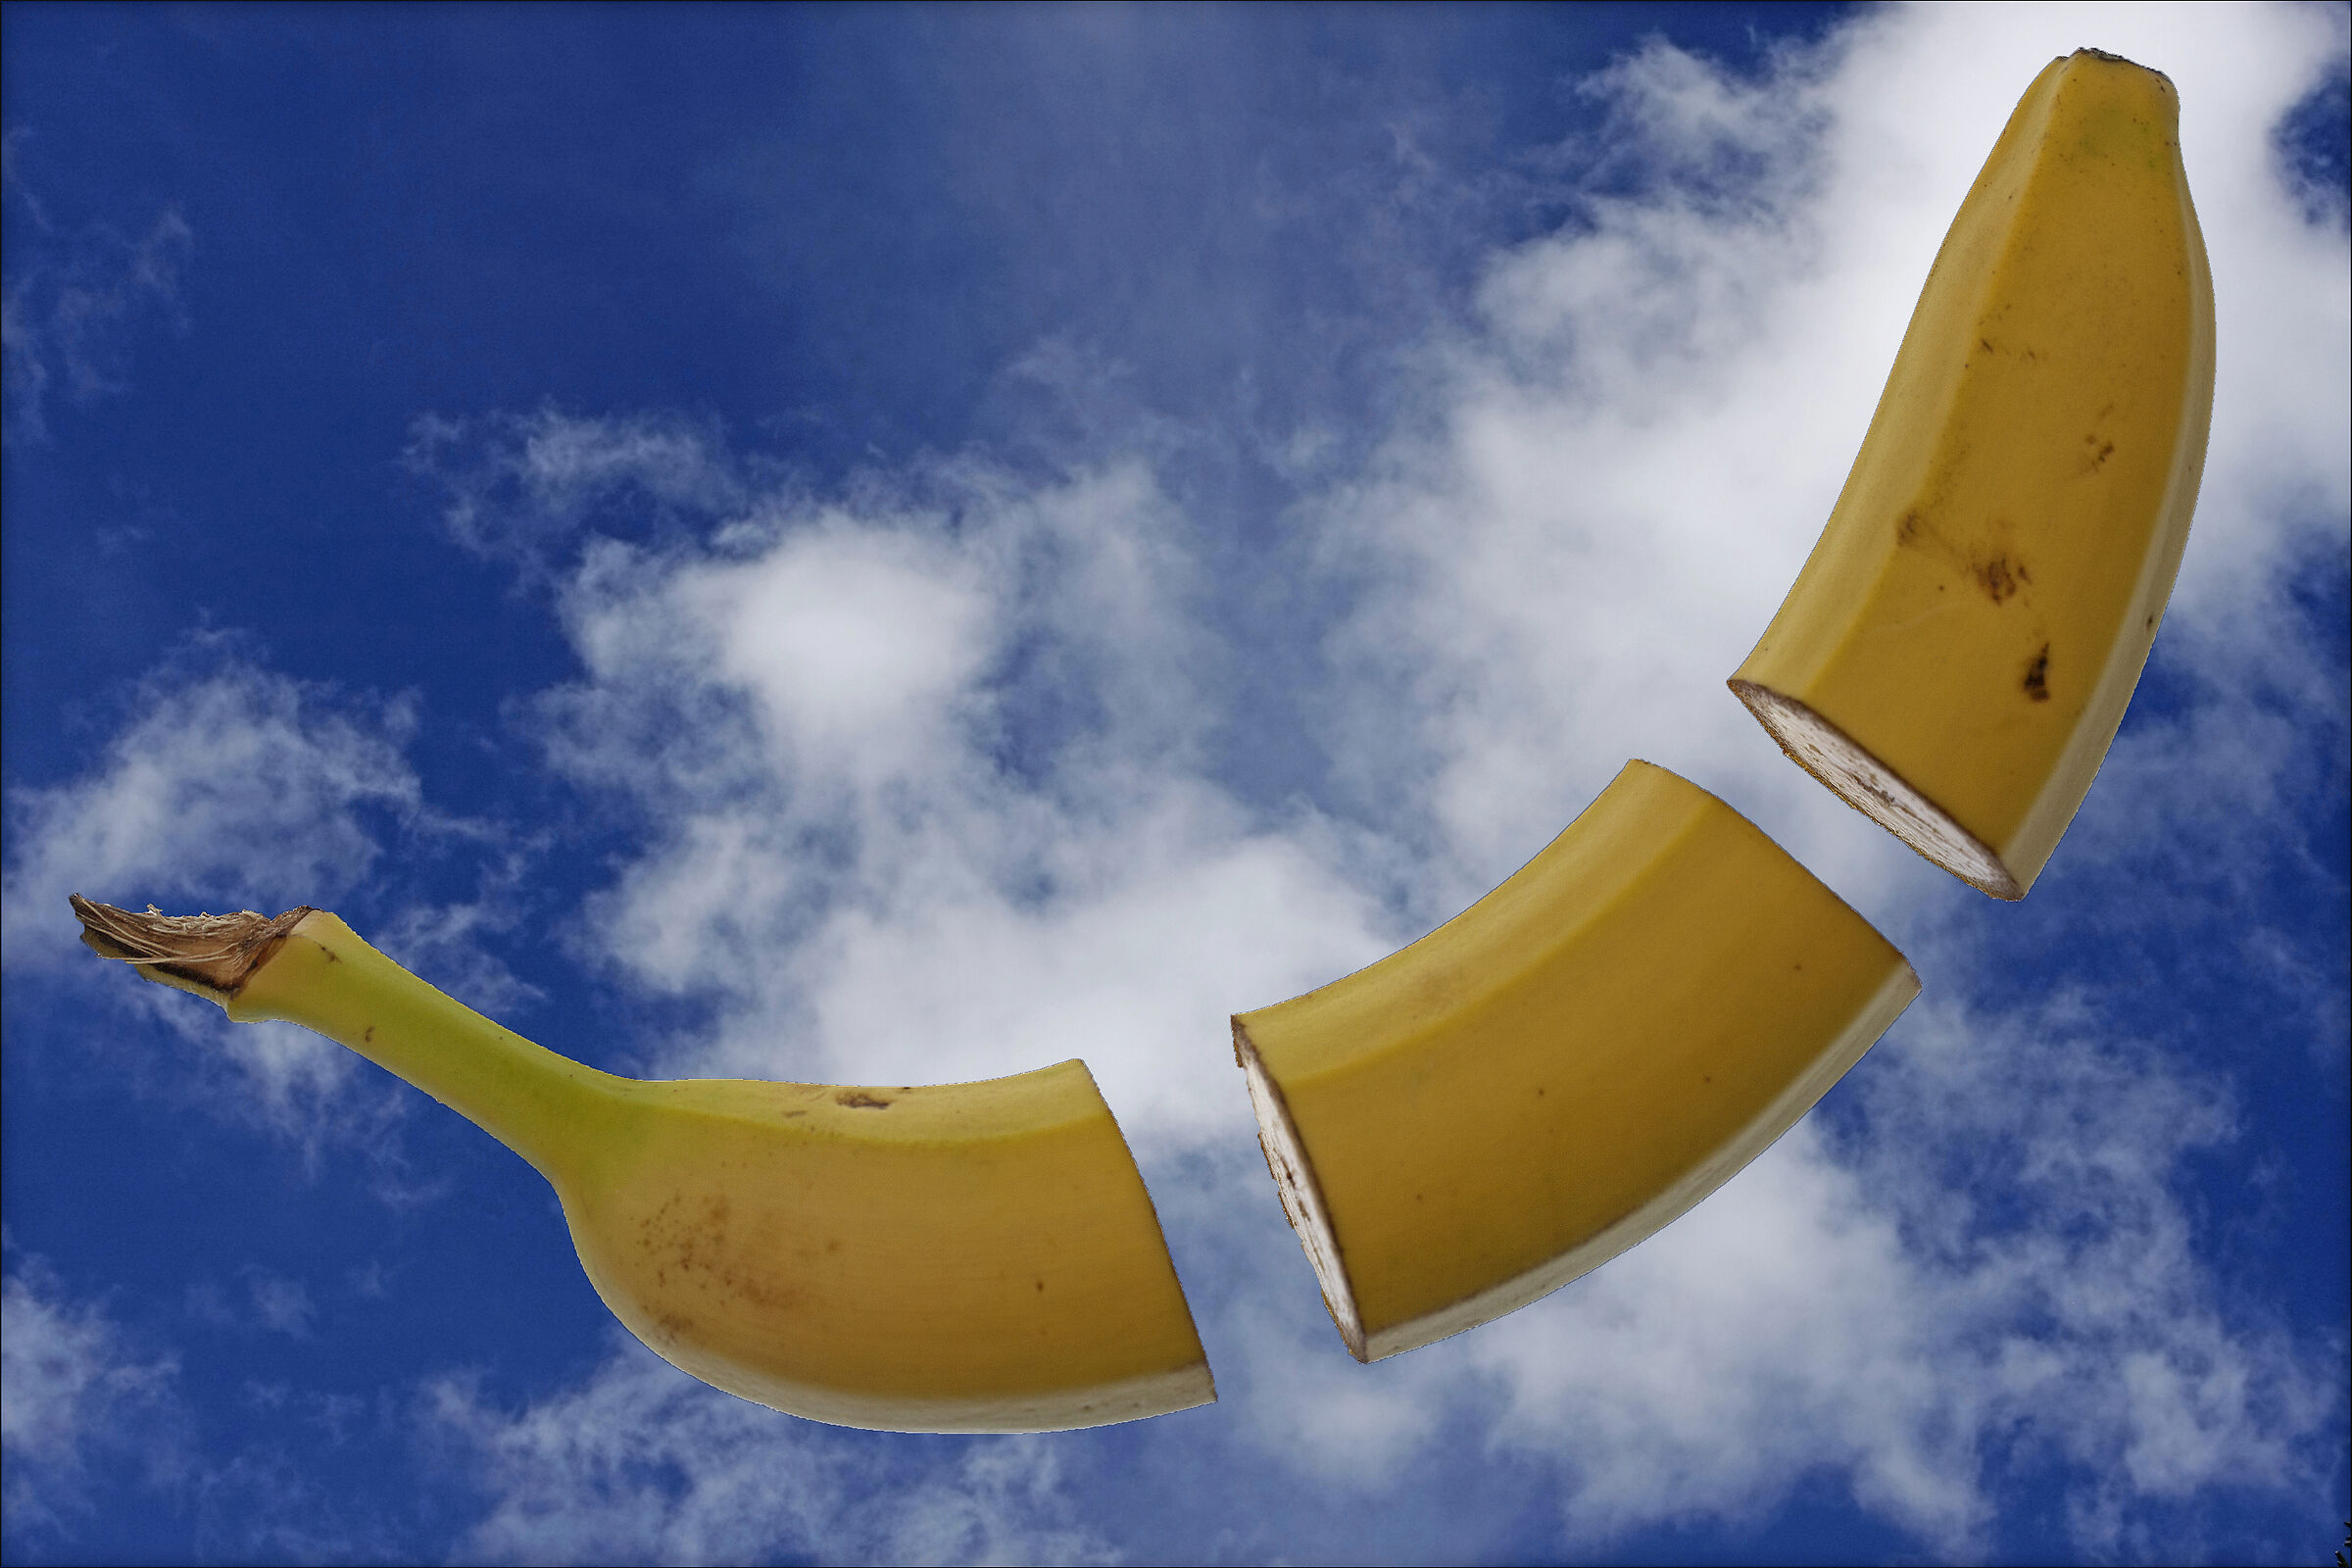 Banana in the clouds...